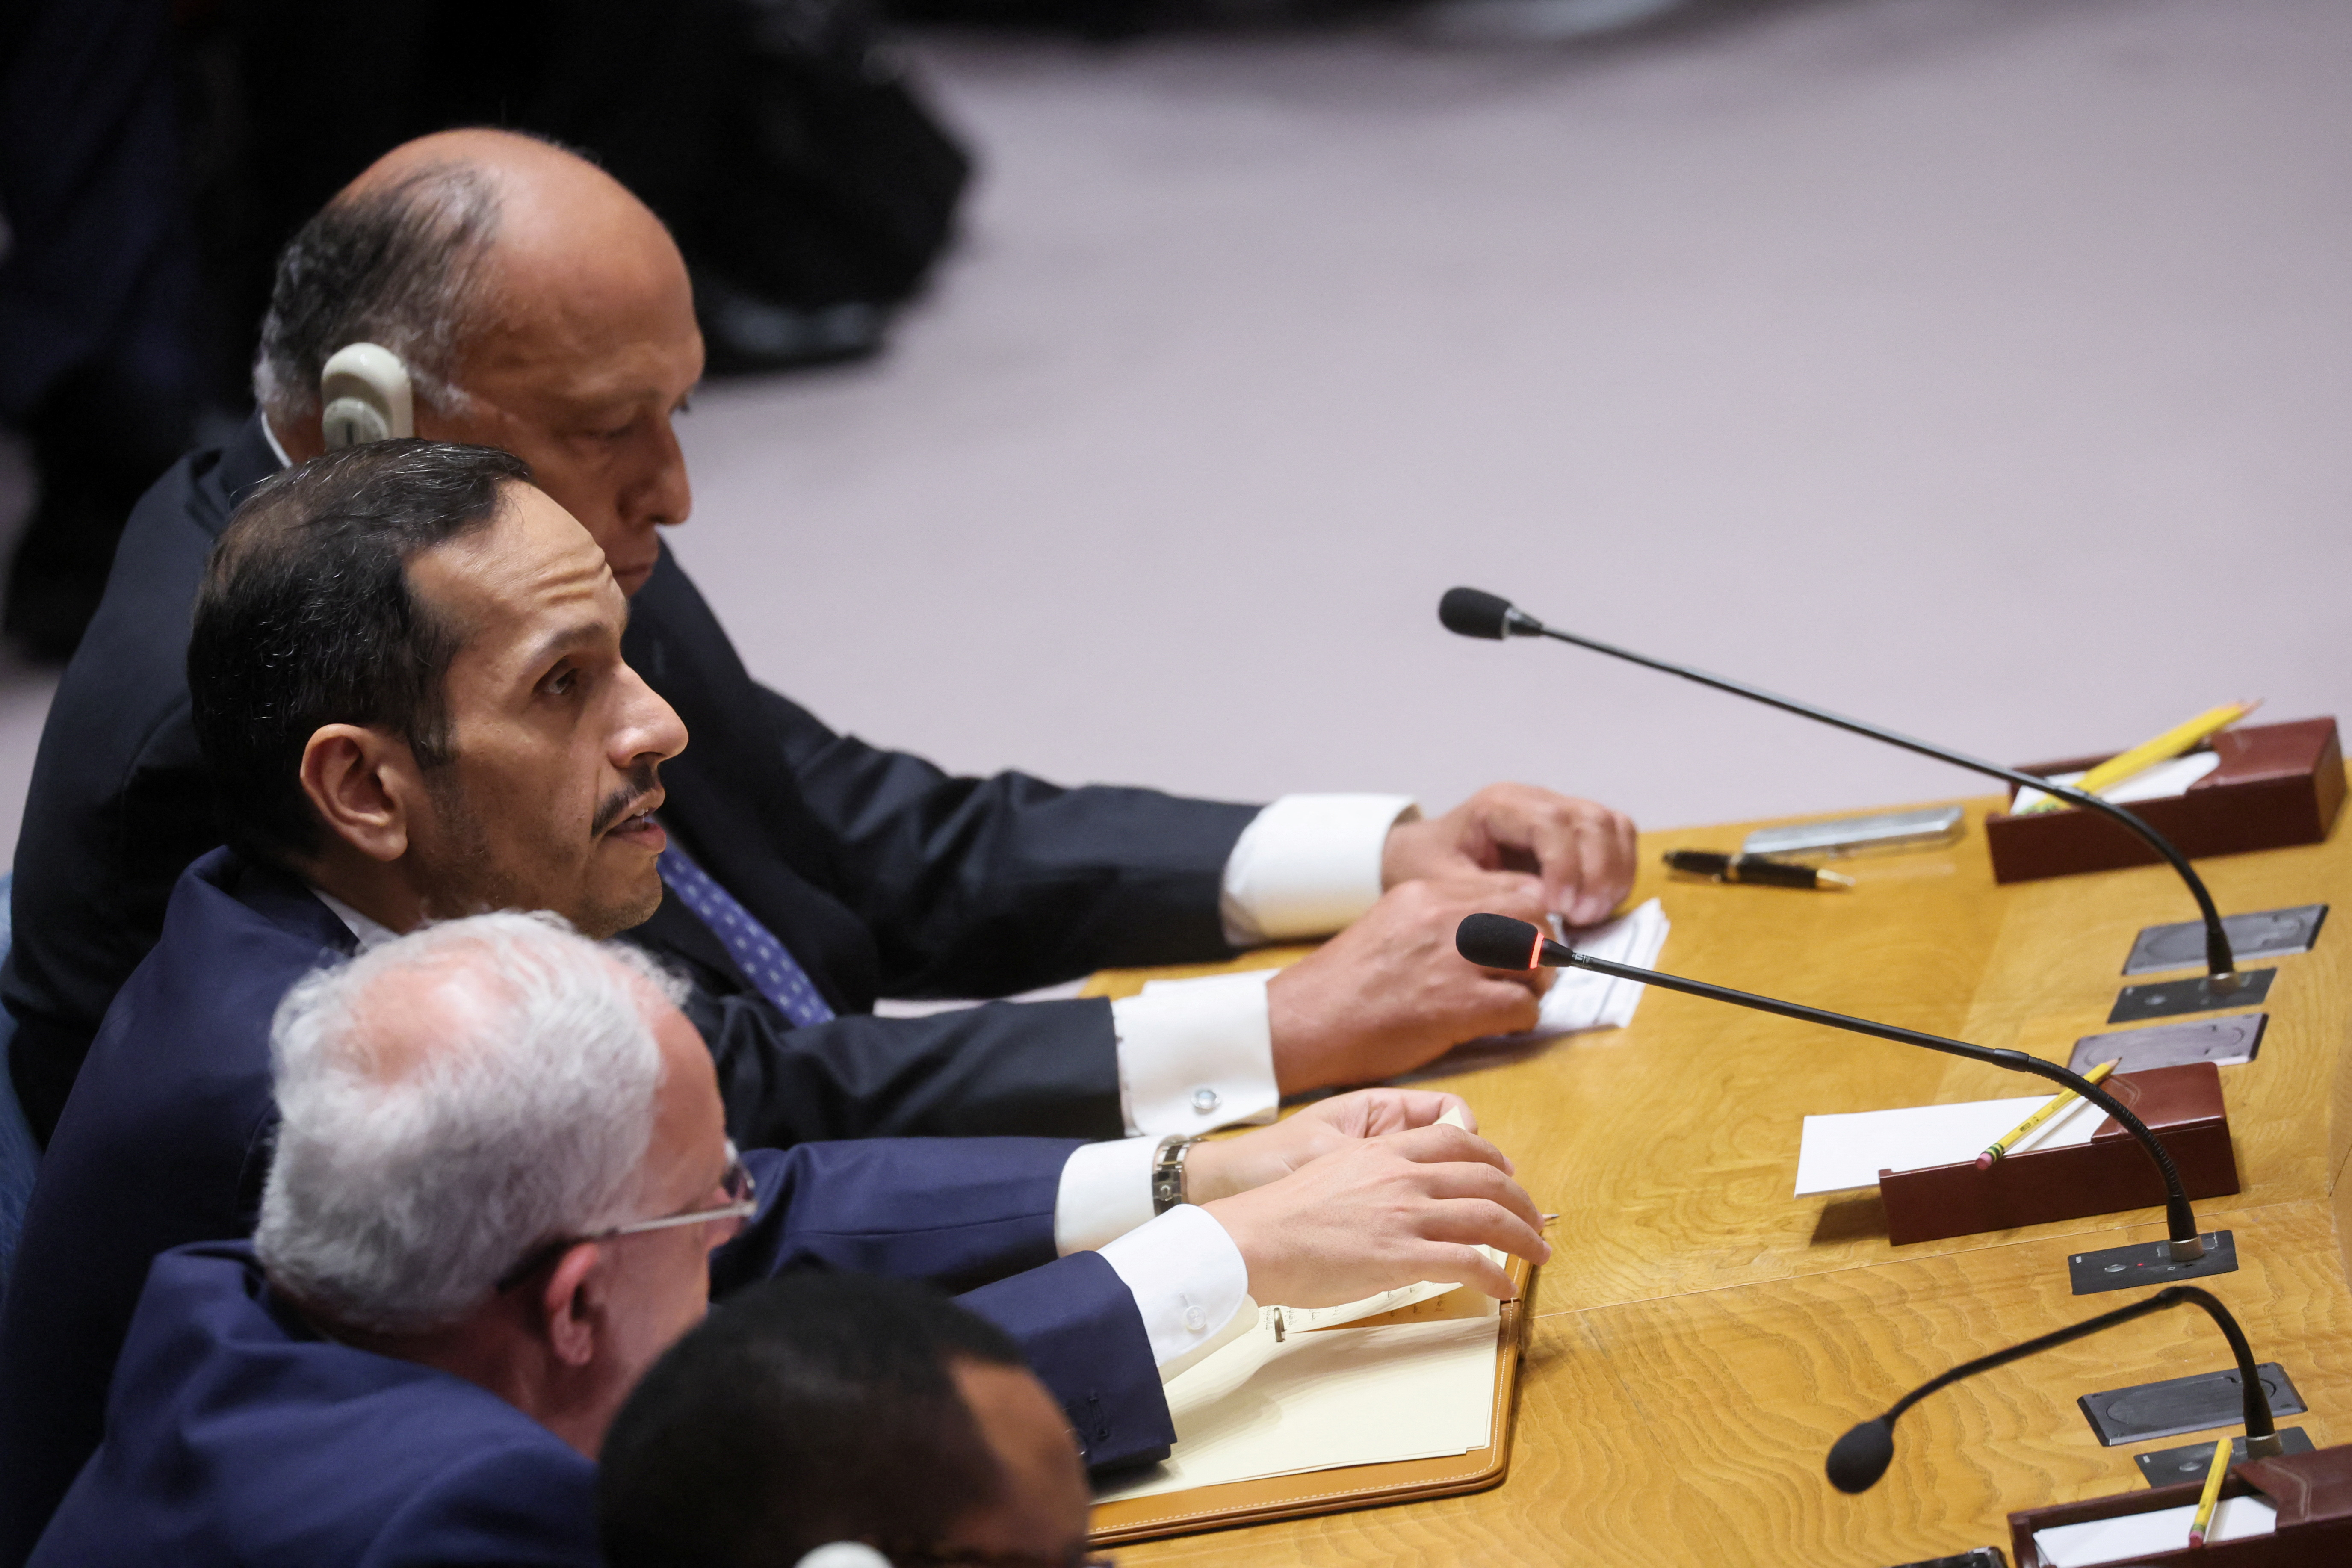 Qatari Prime Minister Mohammed bin Abdulrahman bin Jassim Al Thani attends a UN Security Council meeting on the conflict between Israel and Hamas, in New York City